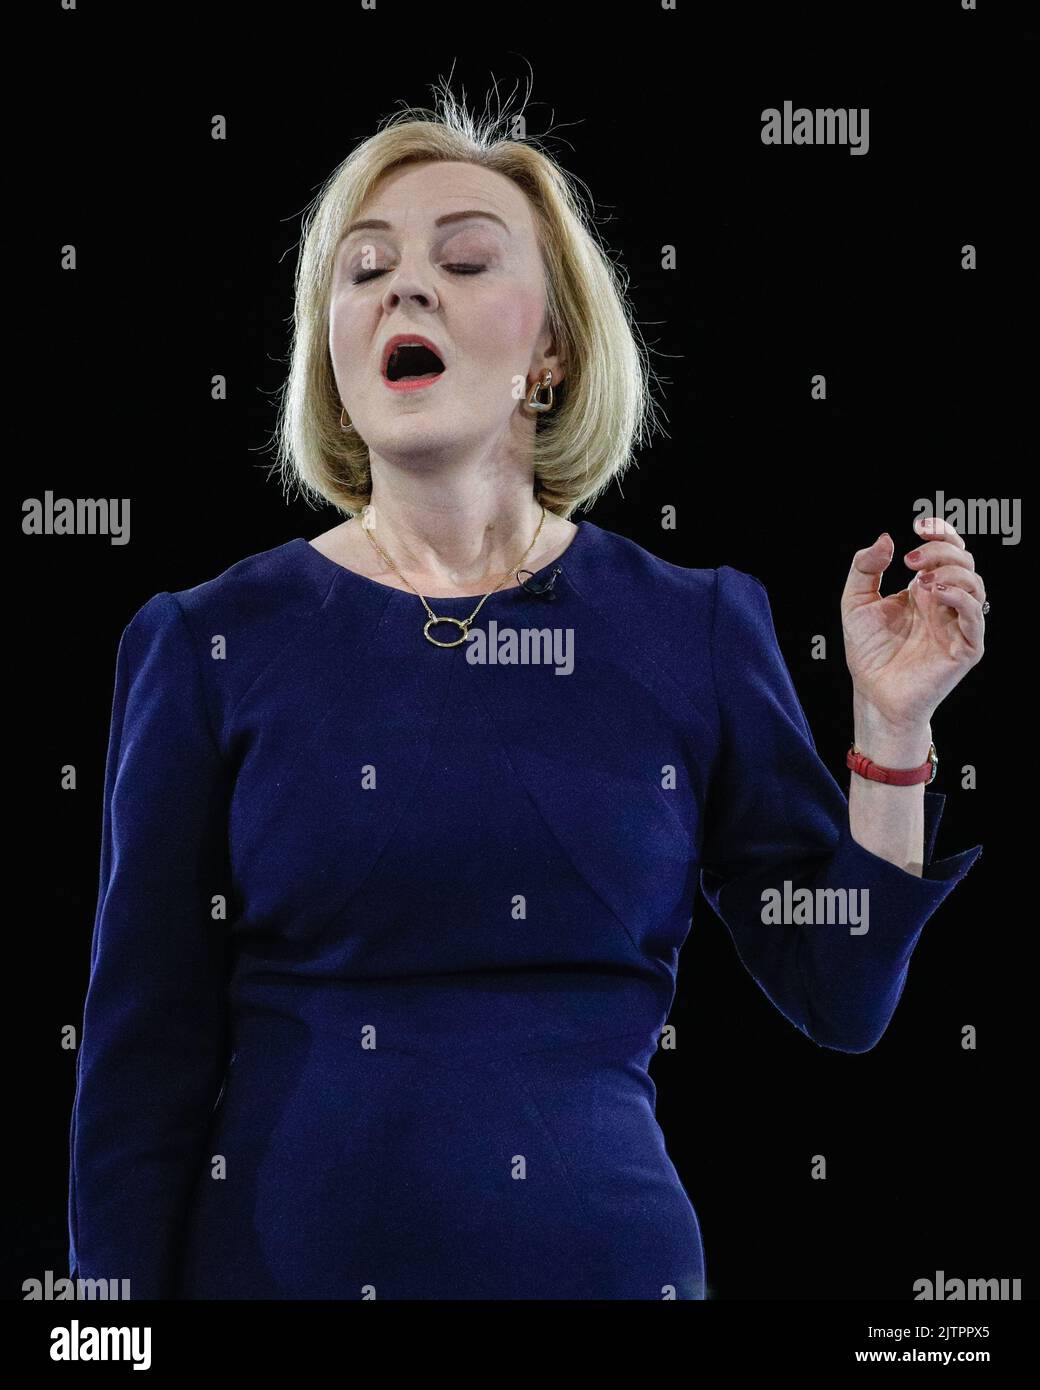 London, UK. 31st Aug, 2022. Liz Truss, Foreign Secretary and currently leading the polls to become the next PM. The final hustings in the Conservative Party leadership race, held at Wembley Arena, sees Liz Truss and Rishi Sunak compete to lead the party and become the next Prime Minister. Credit: Imageplotter/Alamy Live News Stock Photo